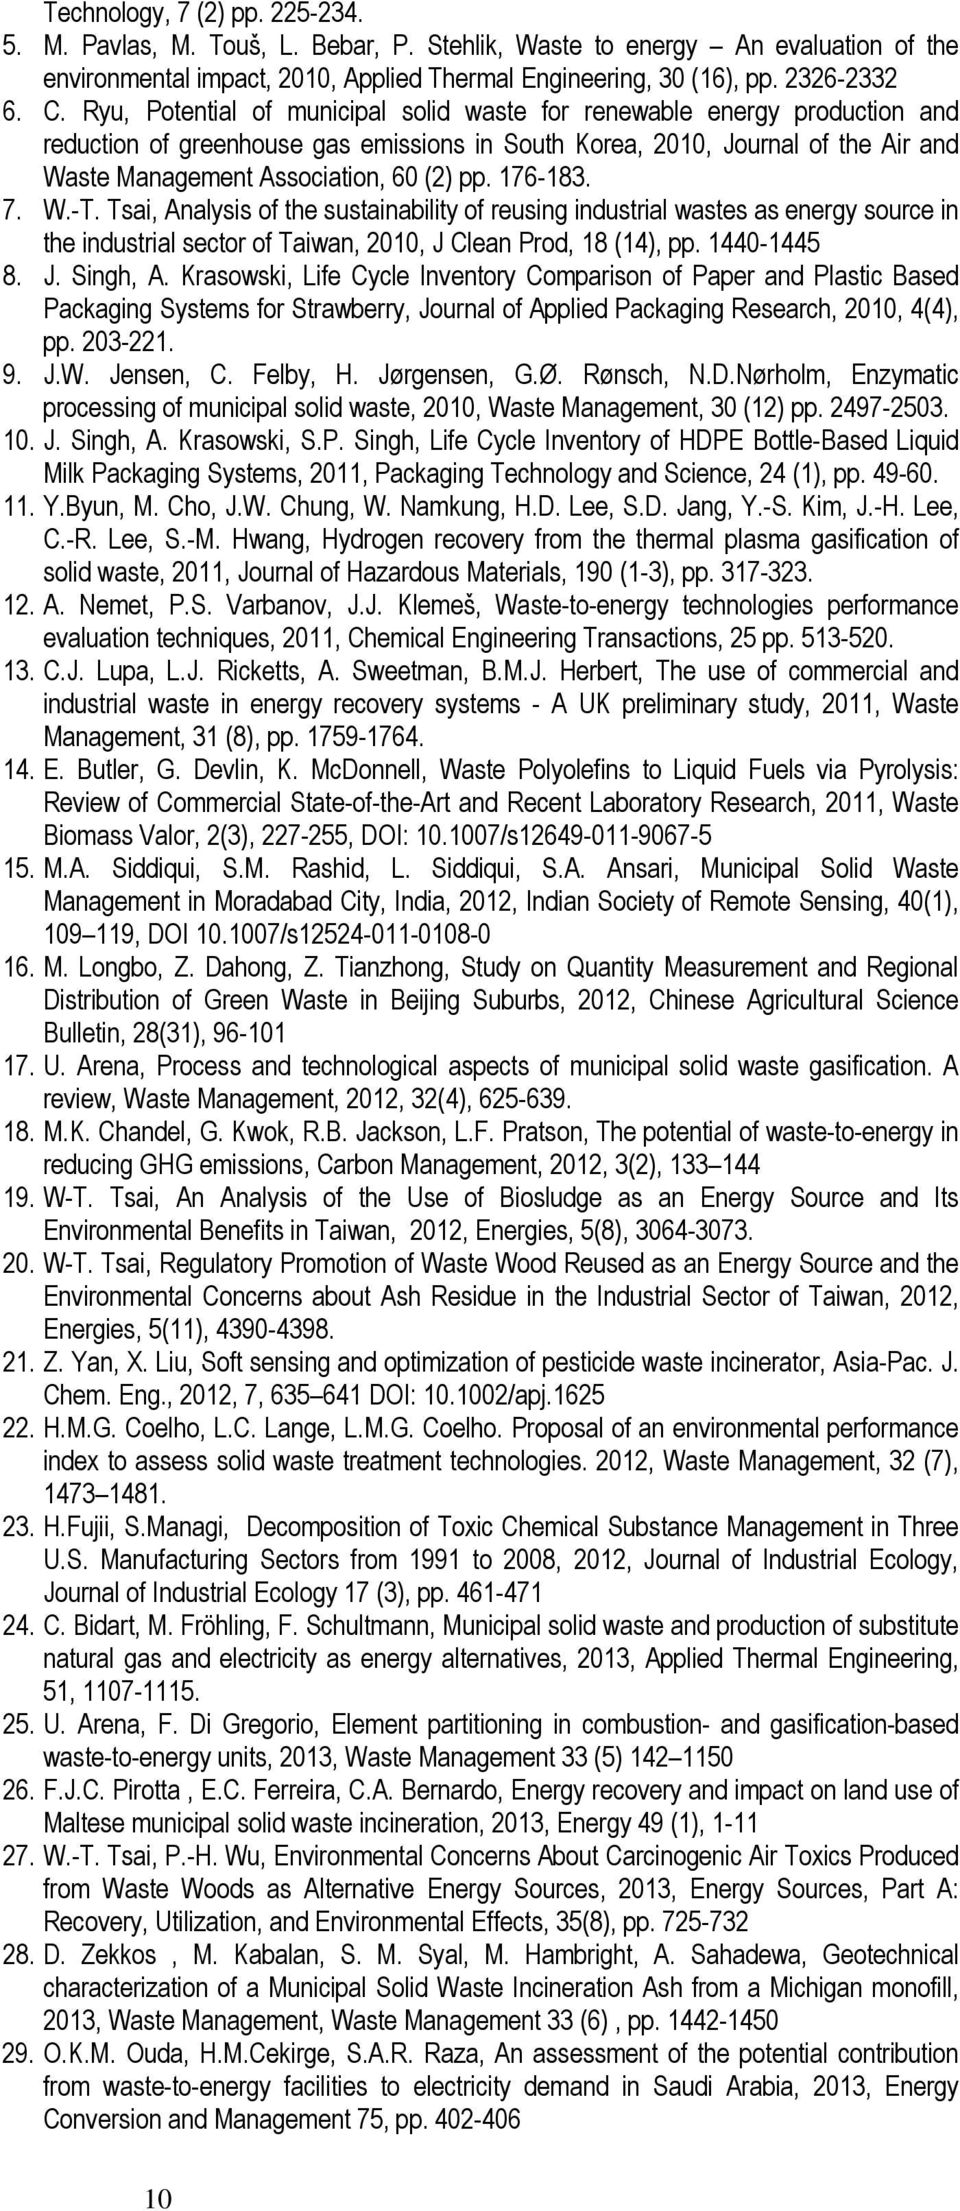 176-183. 7. W.-T. Tsai, Analysis of the sustainability of reusing industrial wastes as energy source in the industrial sector of Taiwan, 2010, J Clean Prod, 18 (14), pp. 1440-1445 8. J. Singh, A.